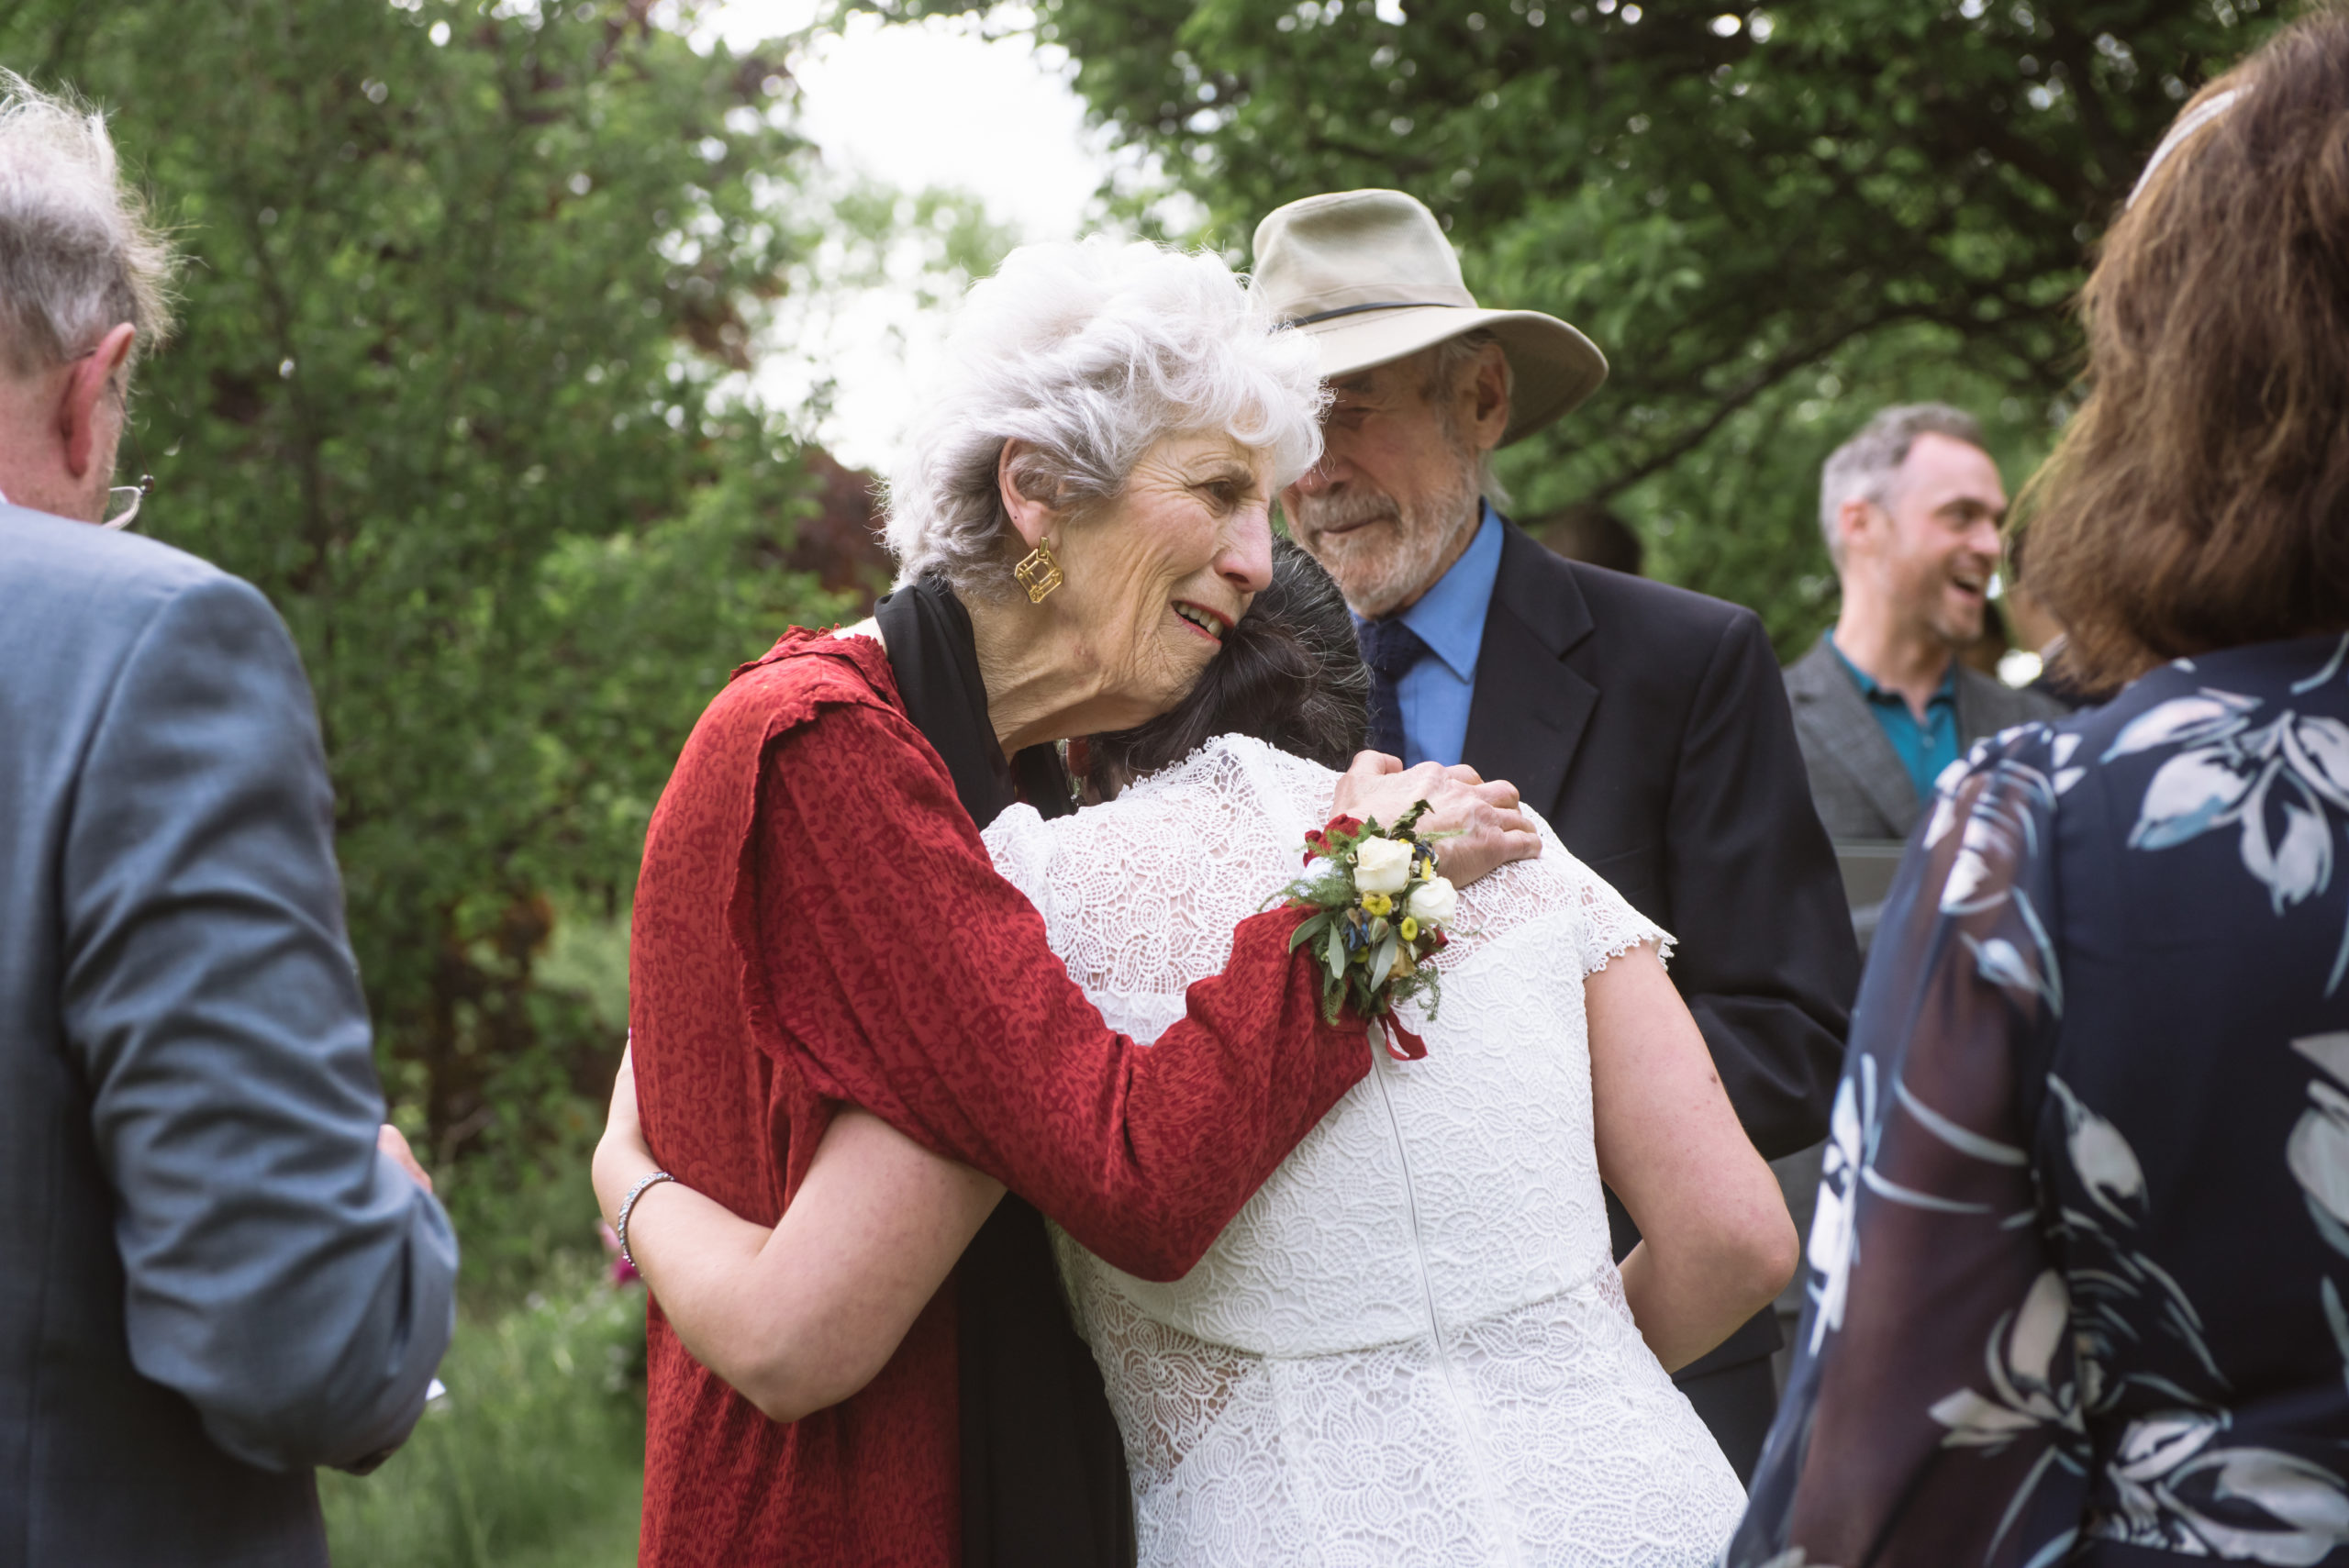 Grandmother of the bride hugging the bride post-ceremony. There are guests surrounding them in the foreground and background. Trees are in the far background.